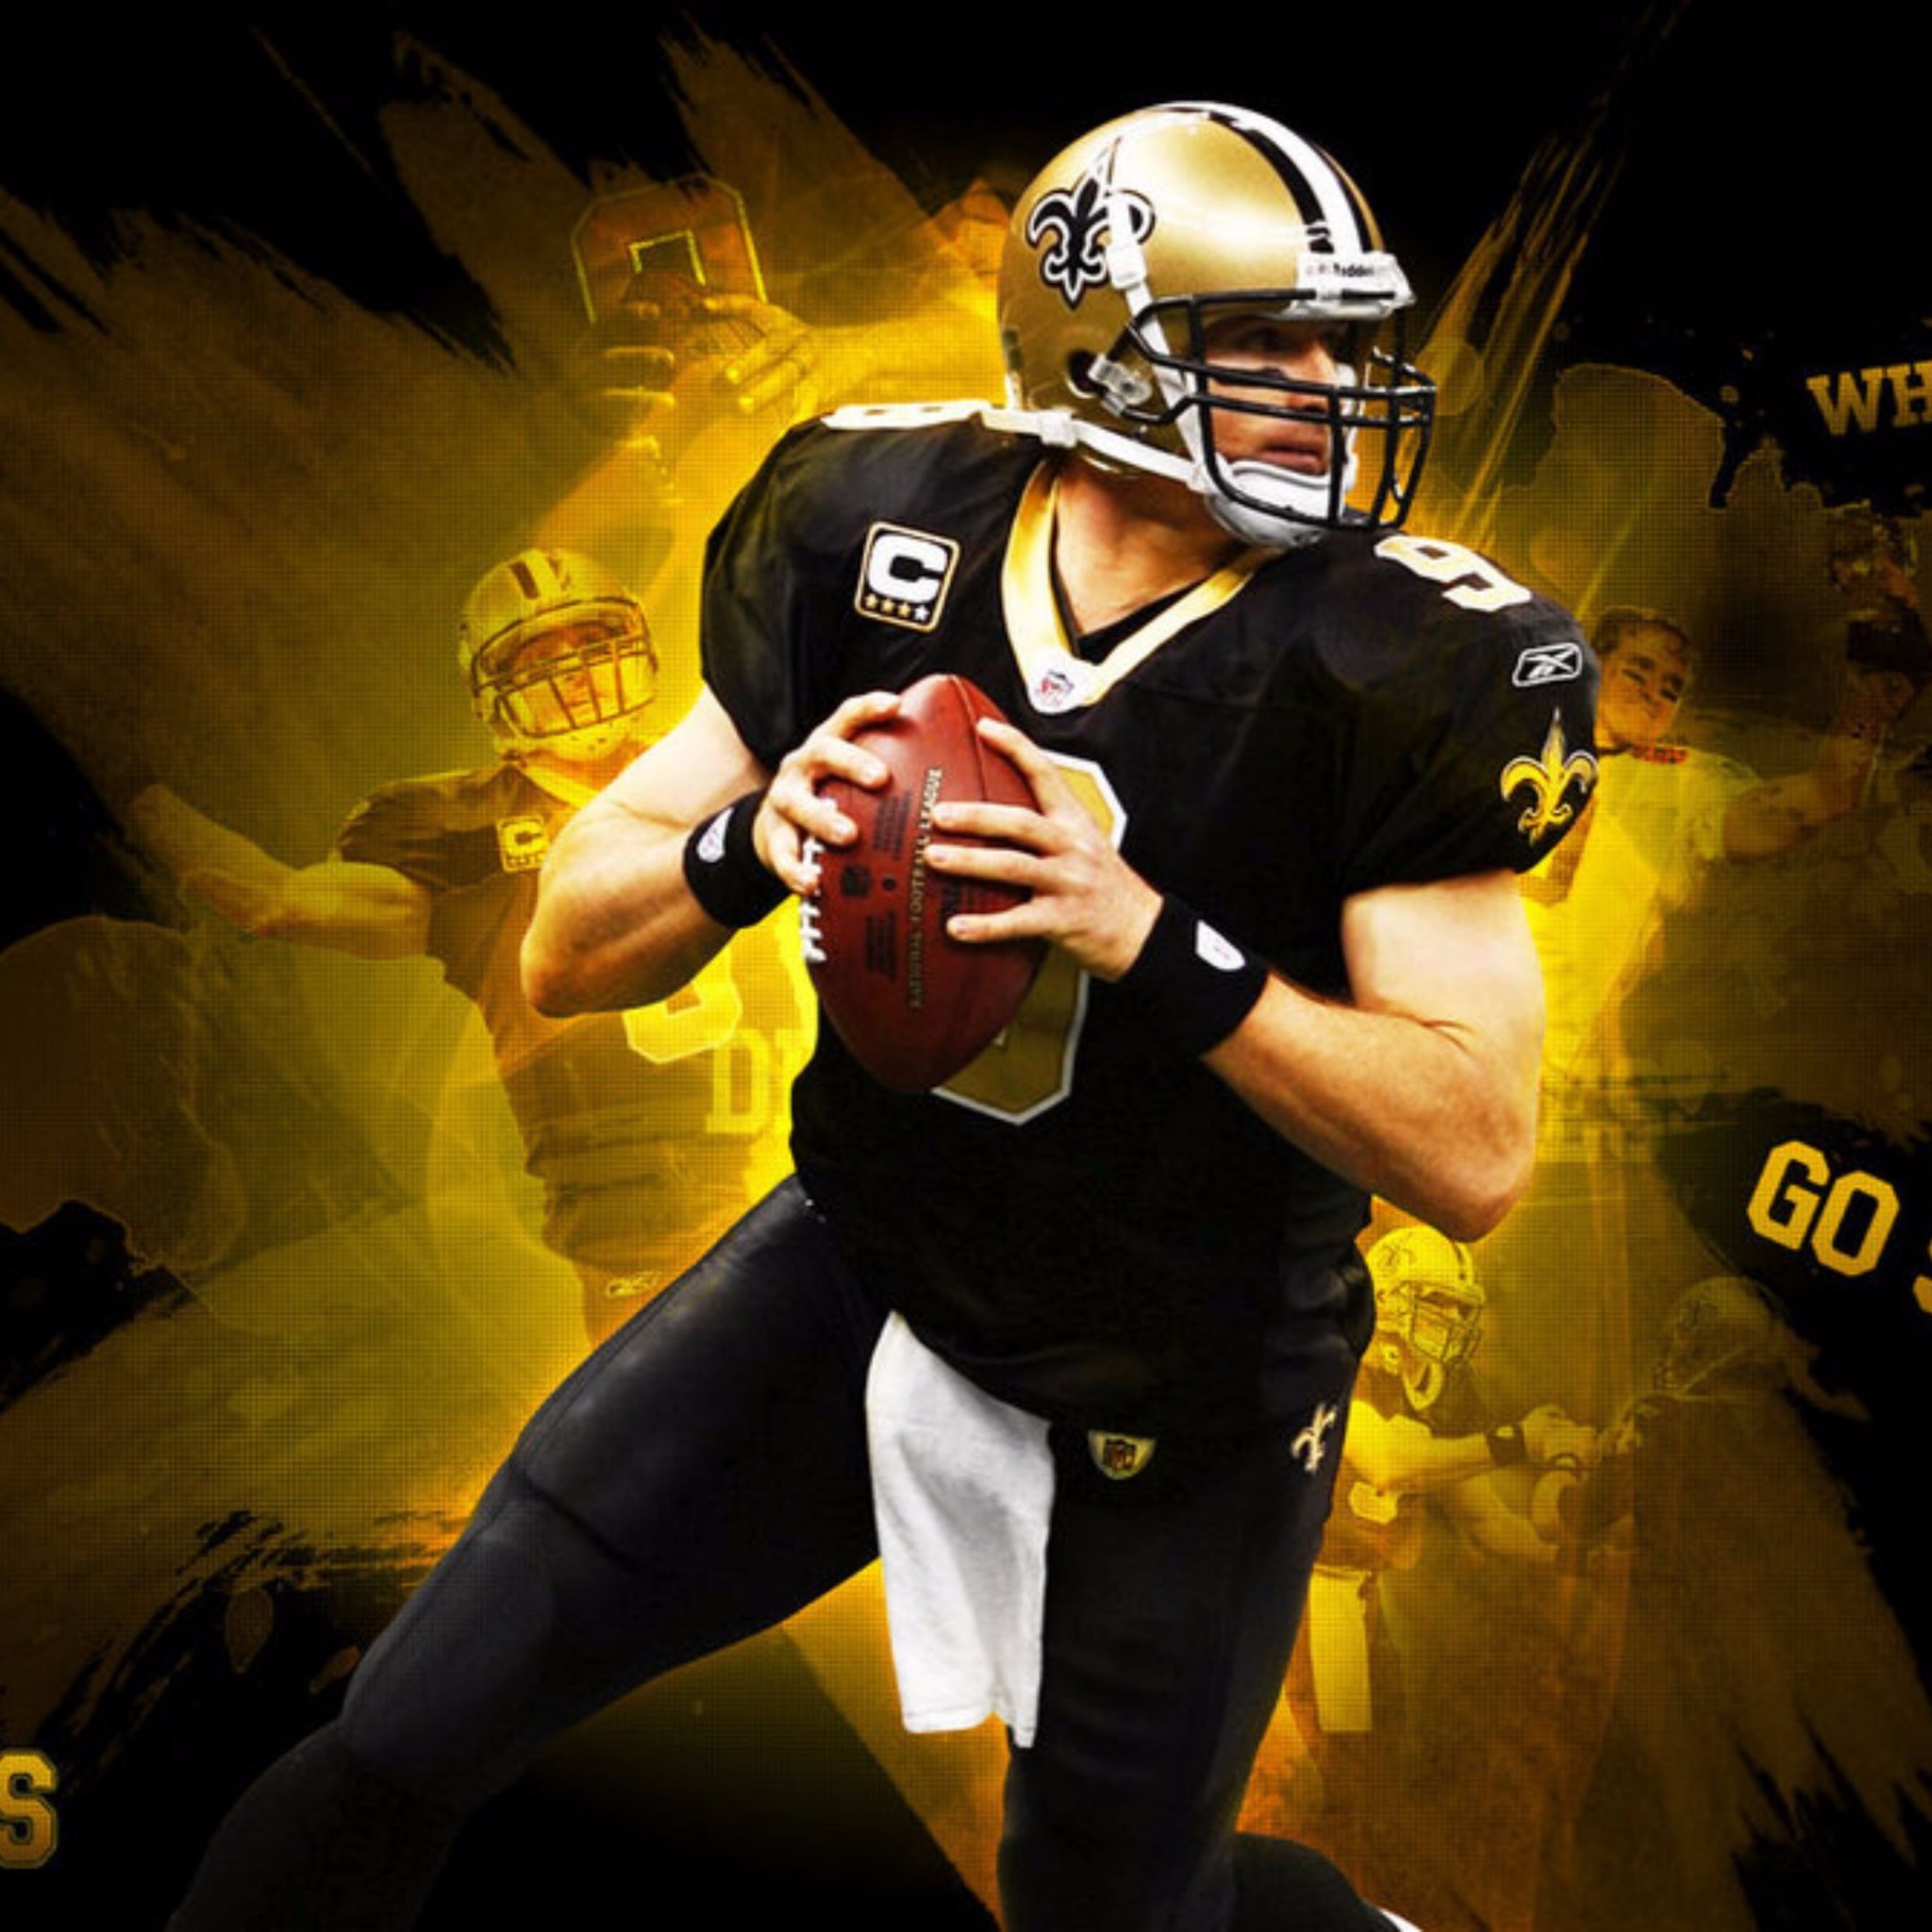 Related to Most Popular 2016 Saints Drew Brees 4K Wallpapers 2048x2048.